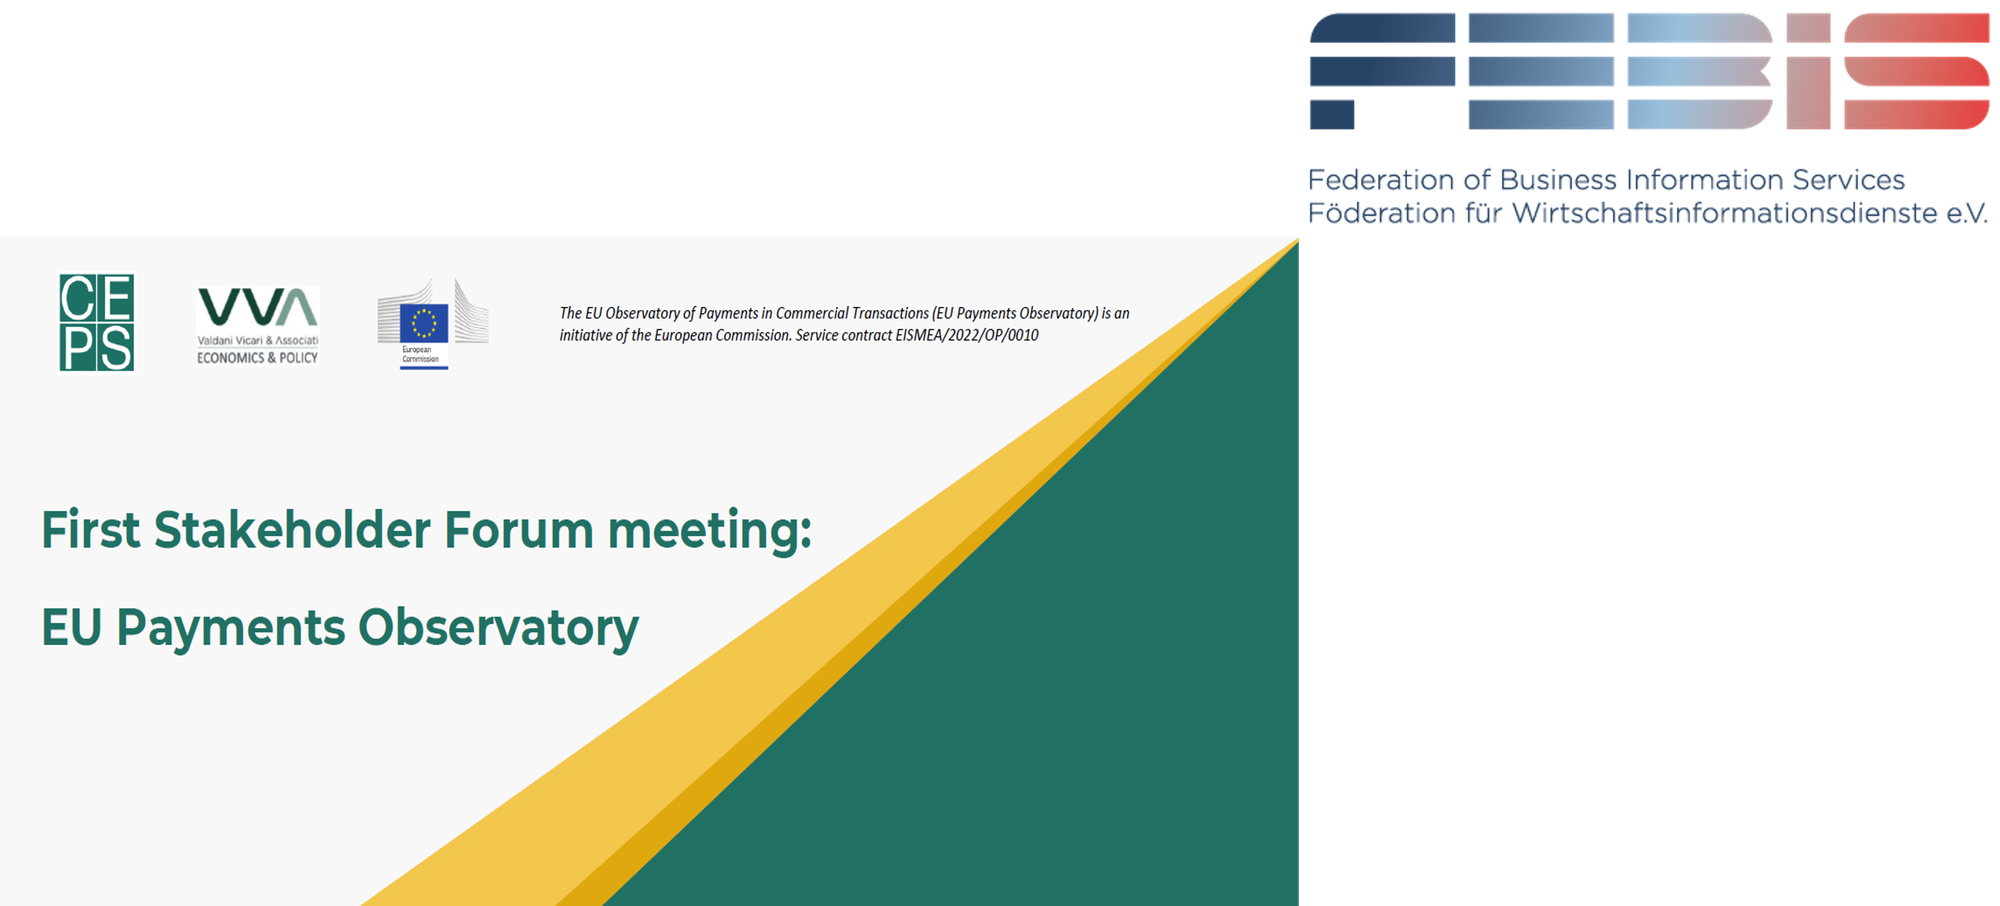 FEBIS participates in the first Stakeholder Forum meeting of the EU Payments Observatory